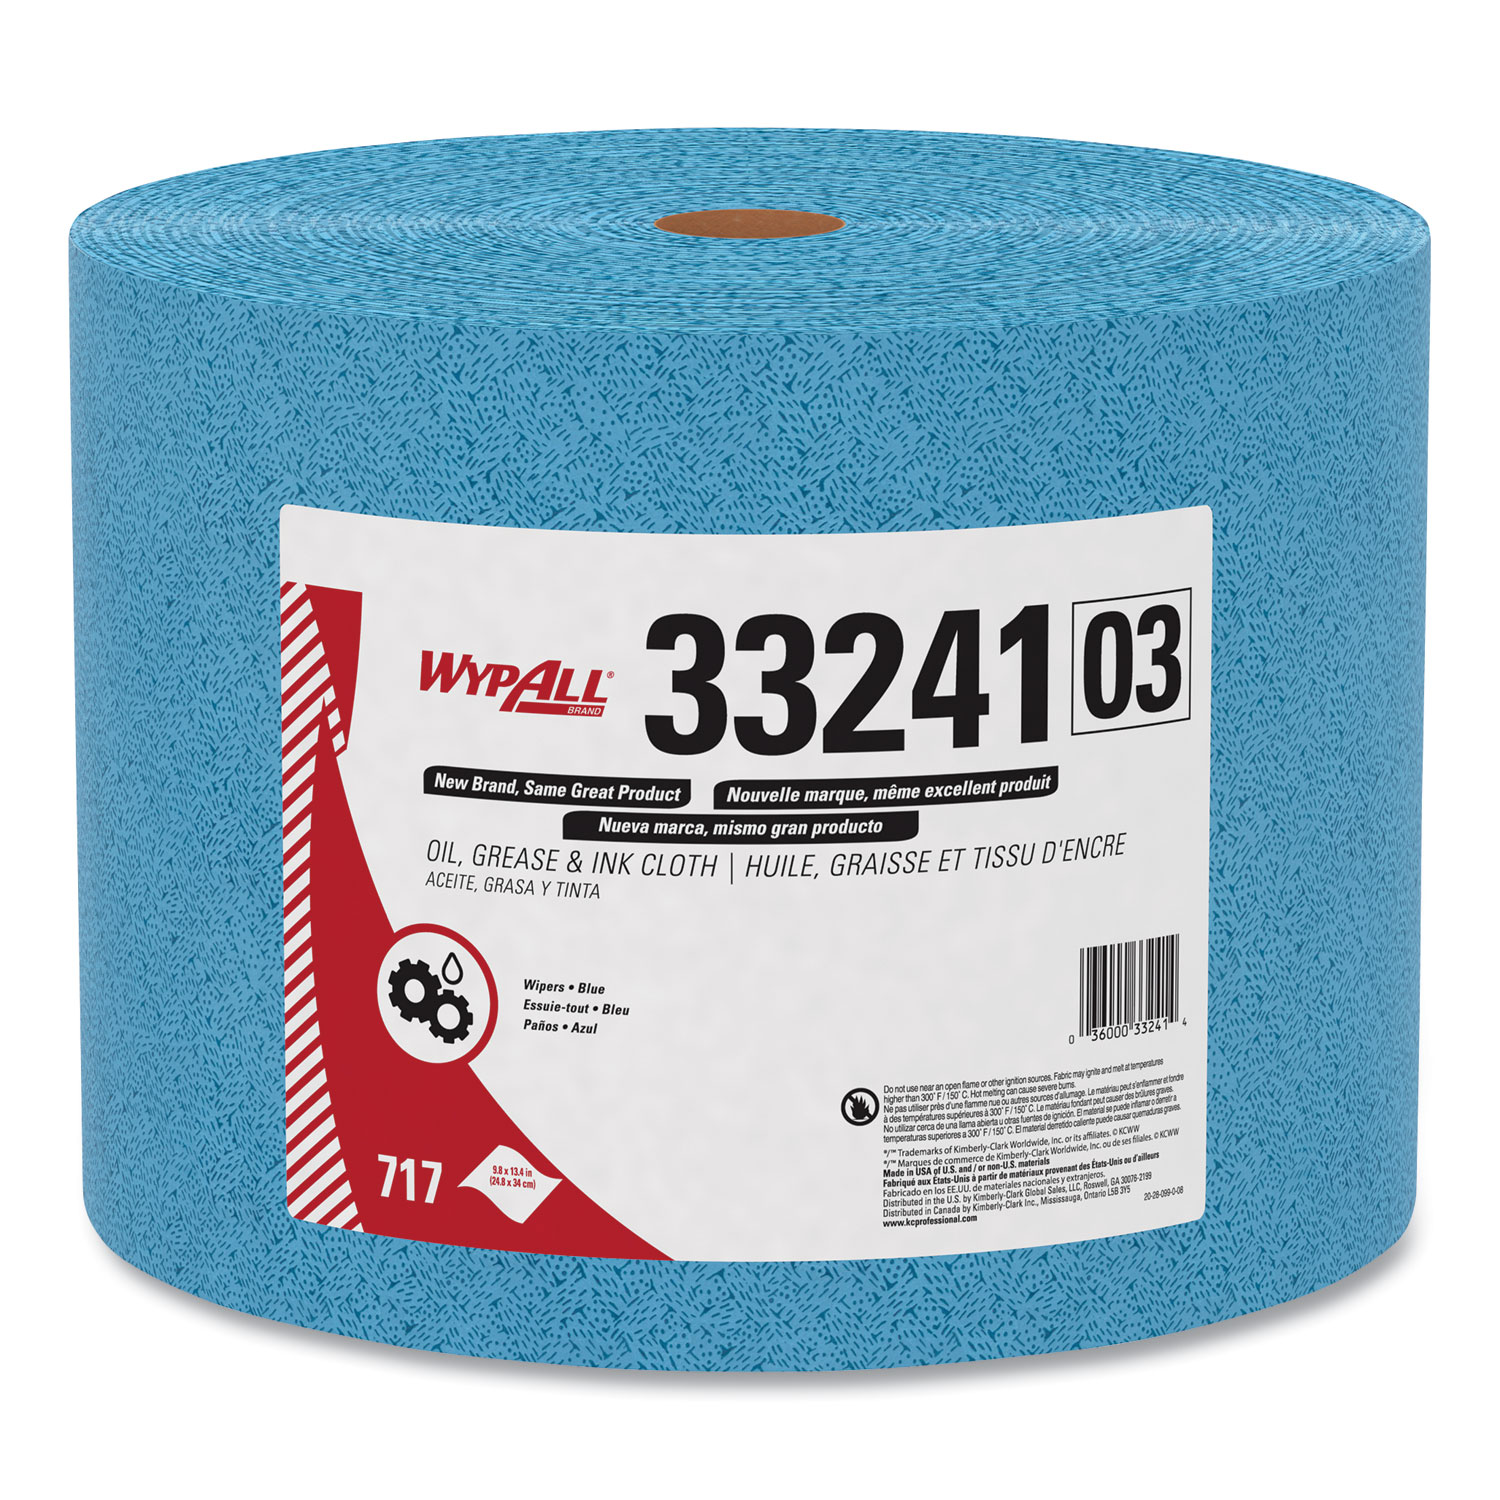  WypAll 33241 Oil, Grease and Ink Cloths, Jumbo Roll, 9 3/5 x 13 2/5, Blue, 717/Roll (KCC33241) 